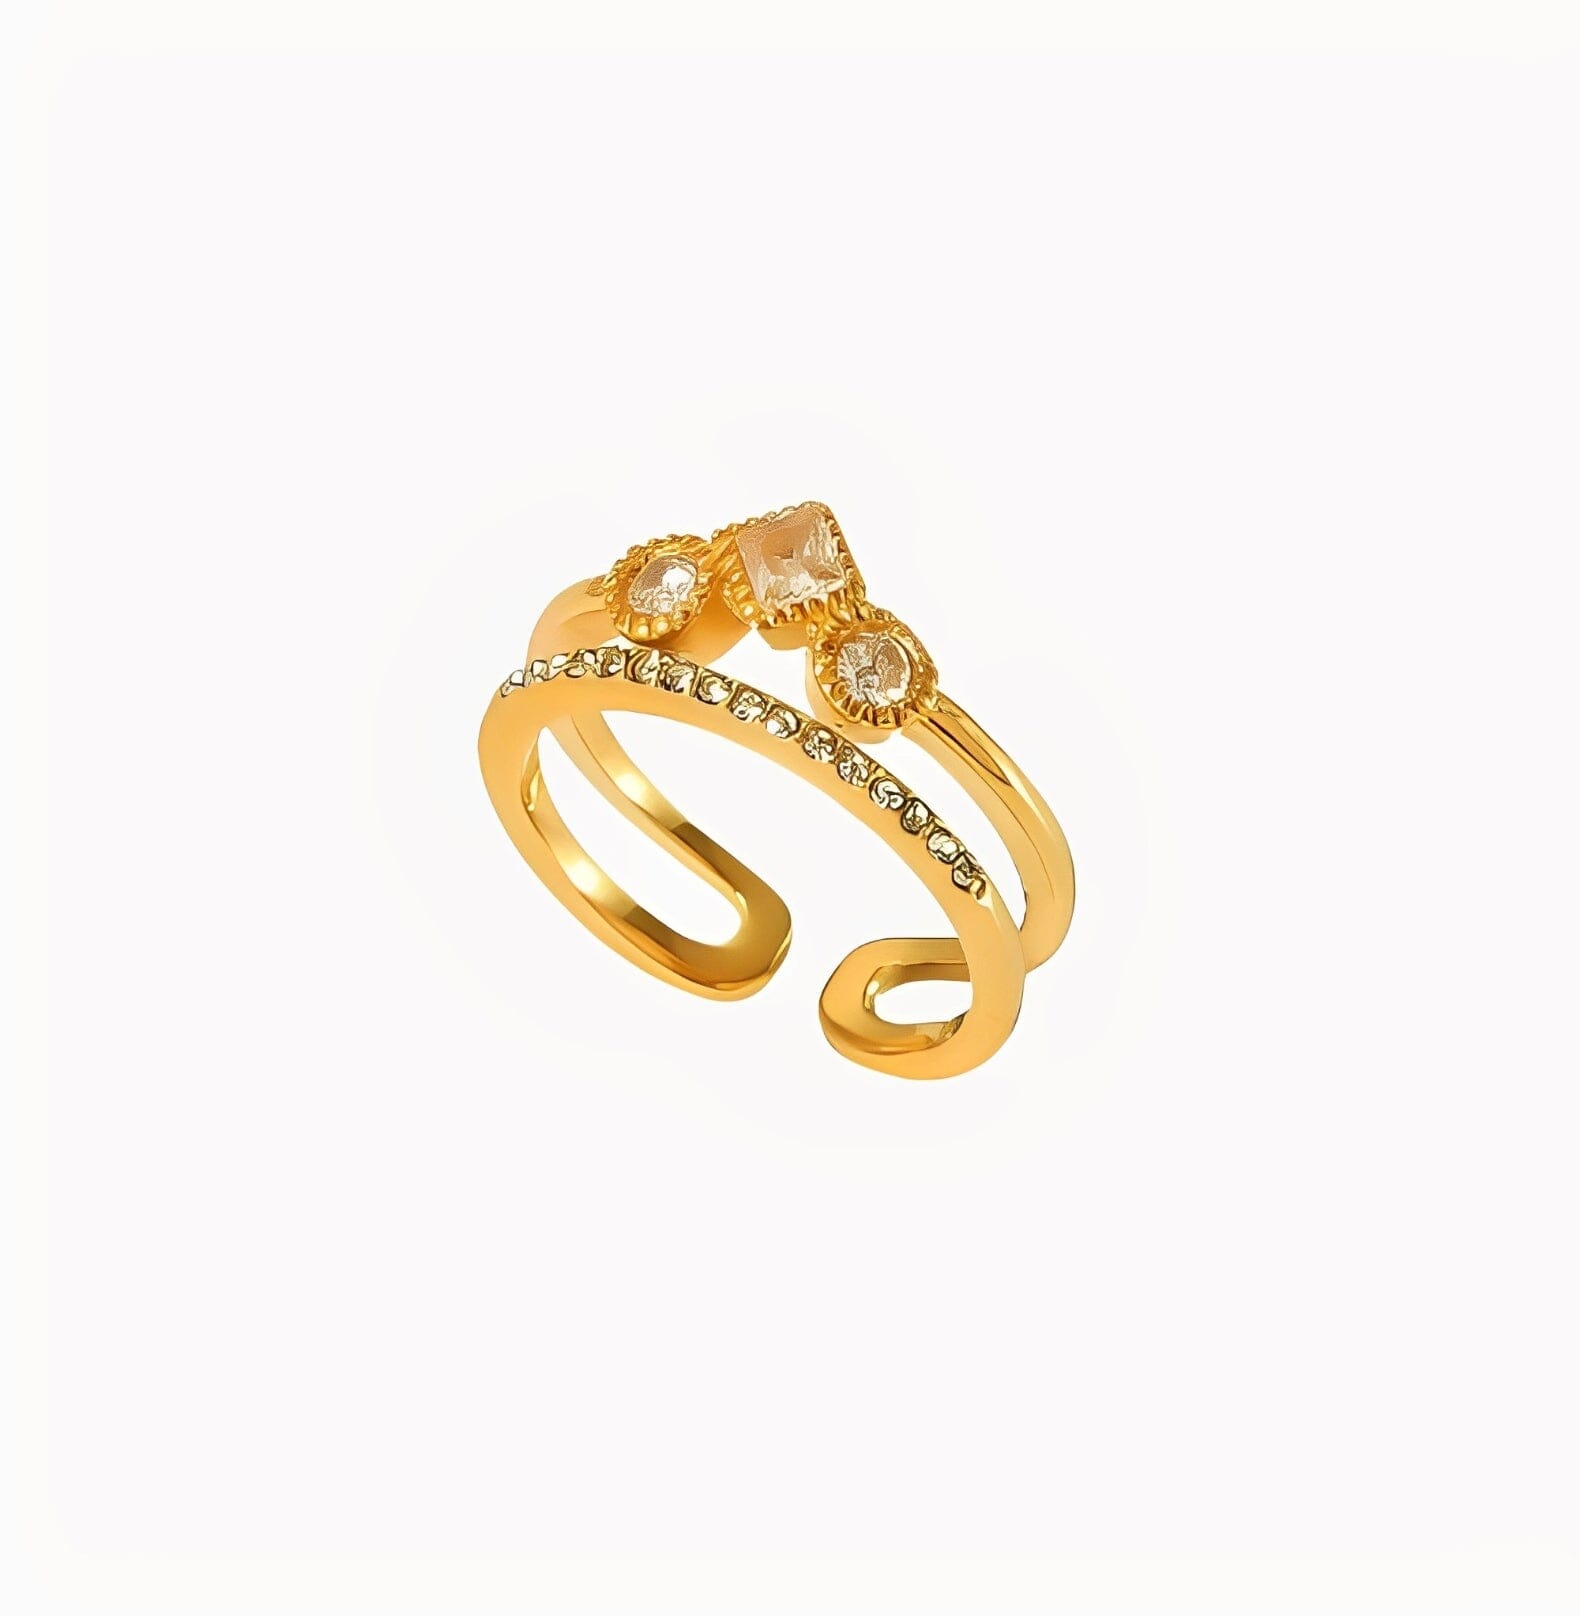 TILLY ZIRCON RING ring Yubama Jewelry Online Store - The Elegant Designs of Gold and Silver ! 